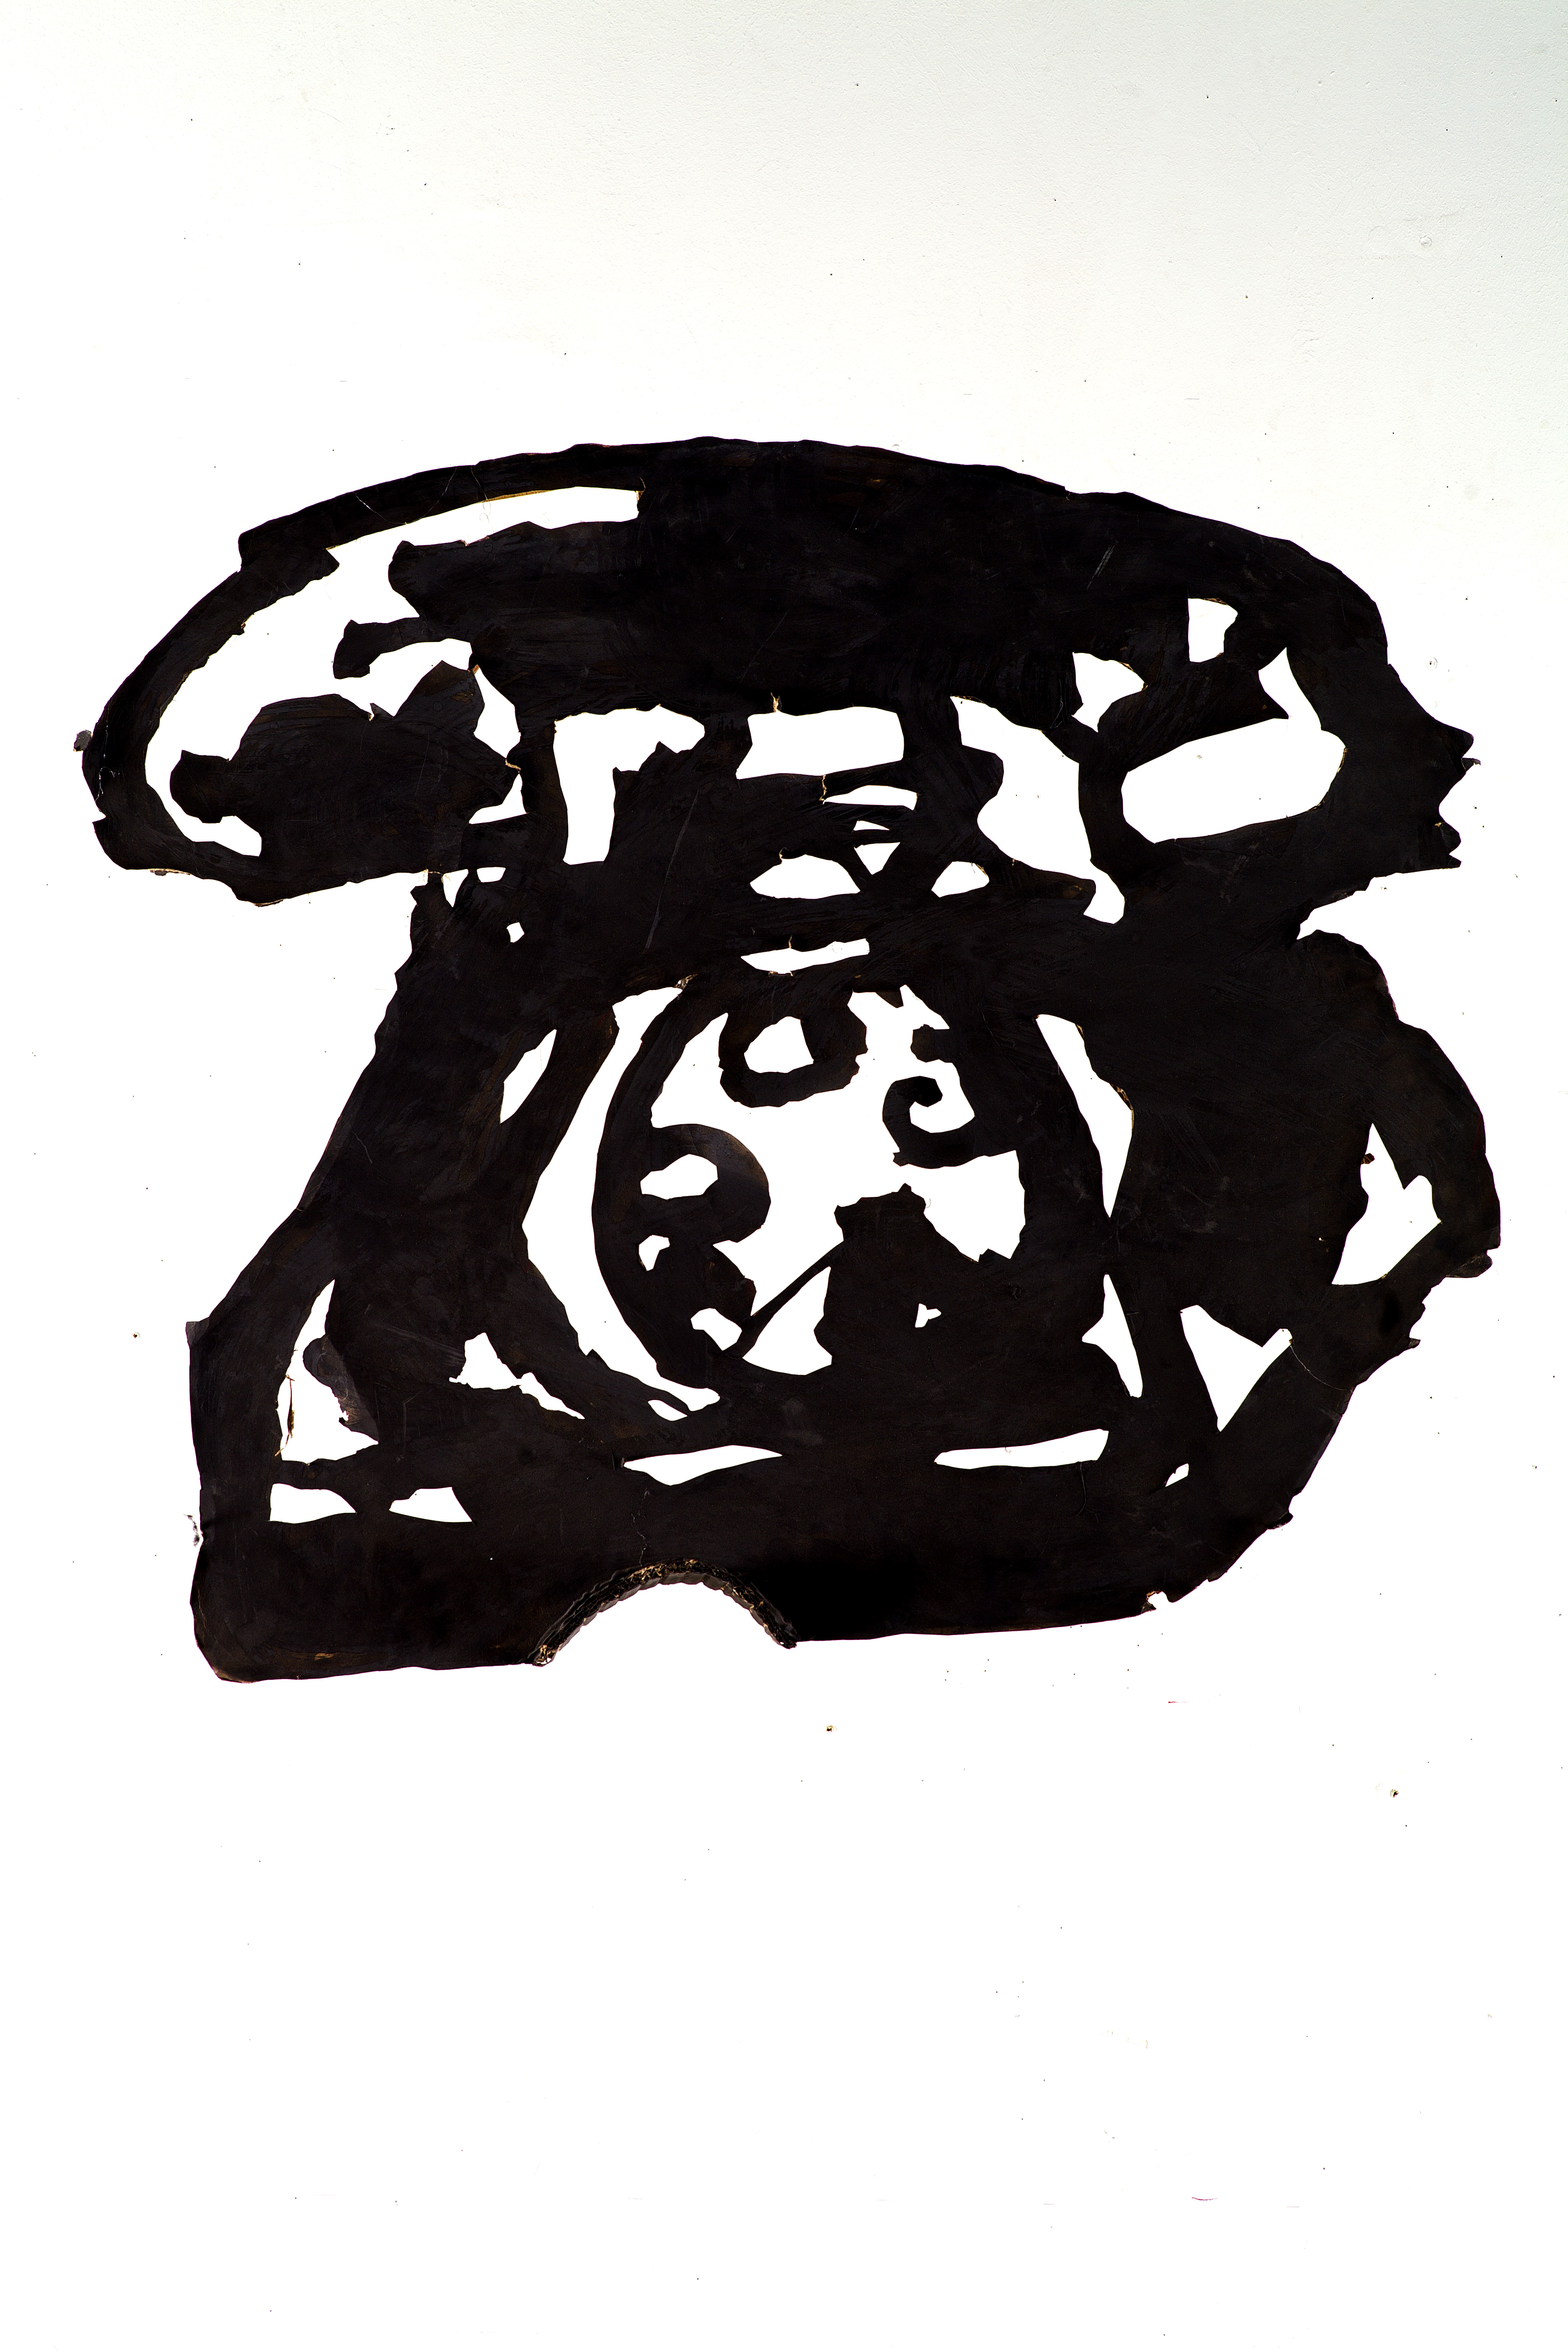 Prop for More Sweetly Play the Dance (Small Silhouette 31 - Telephone)